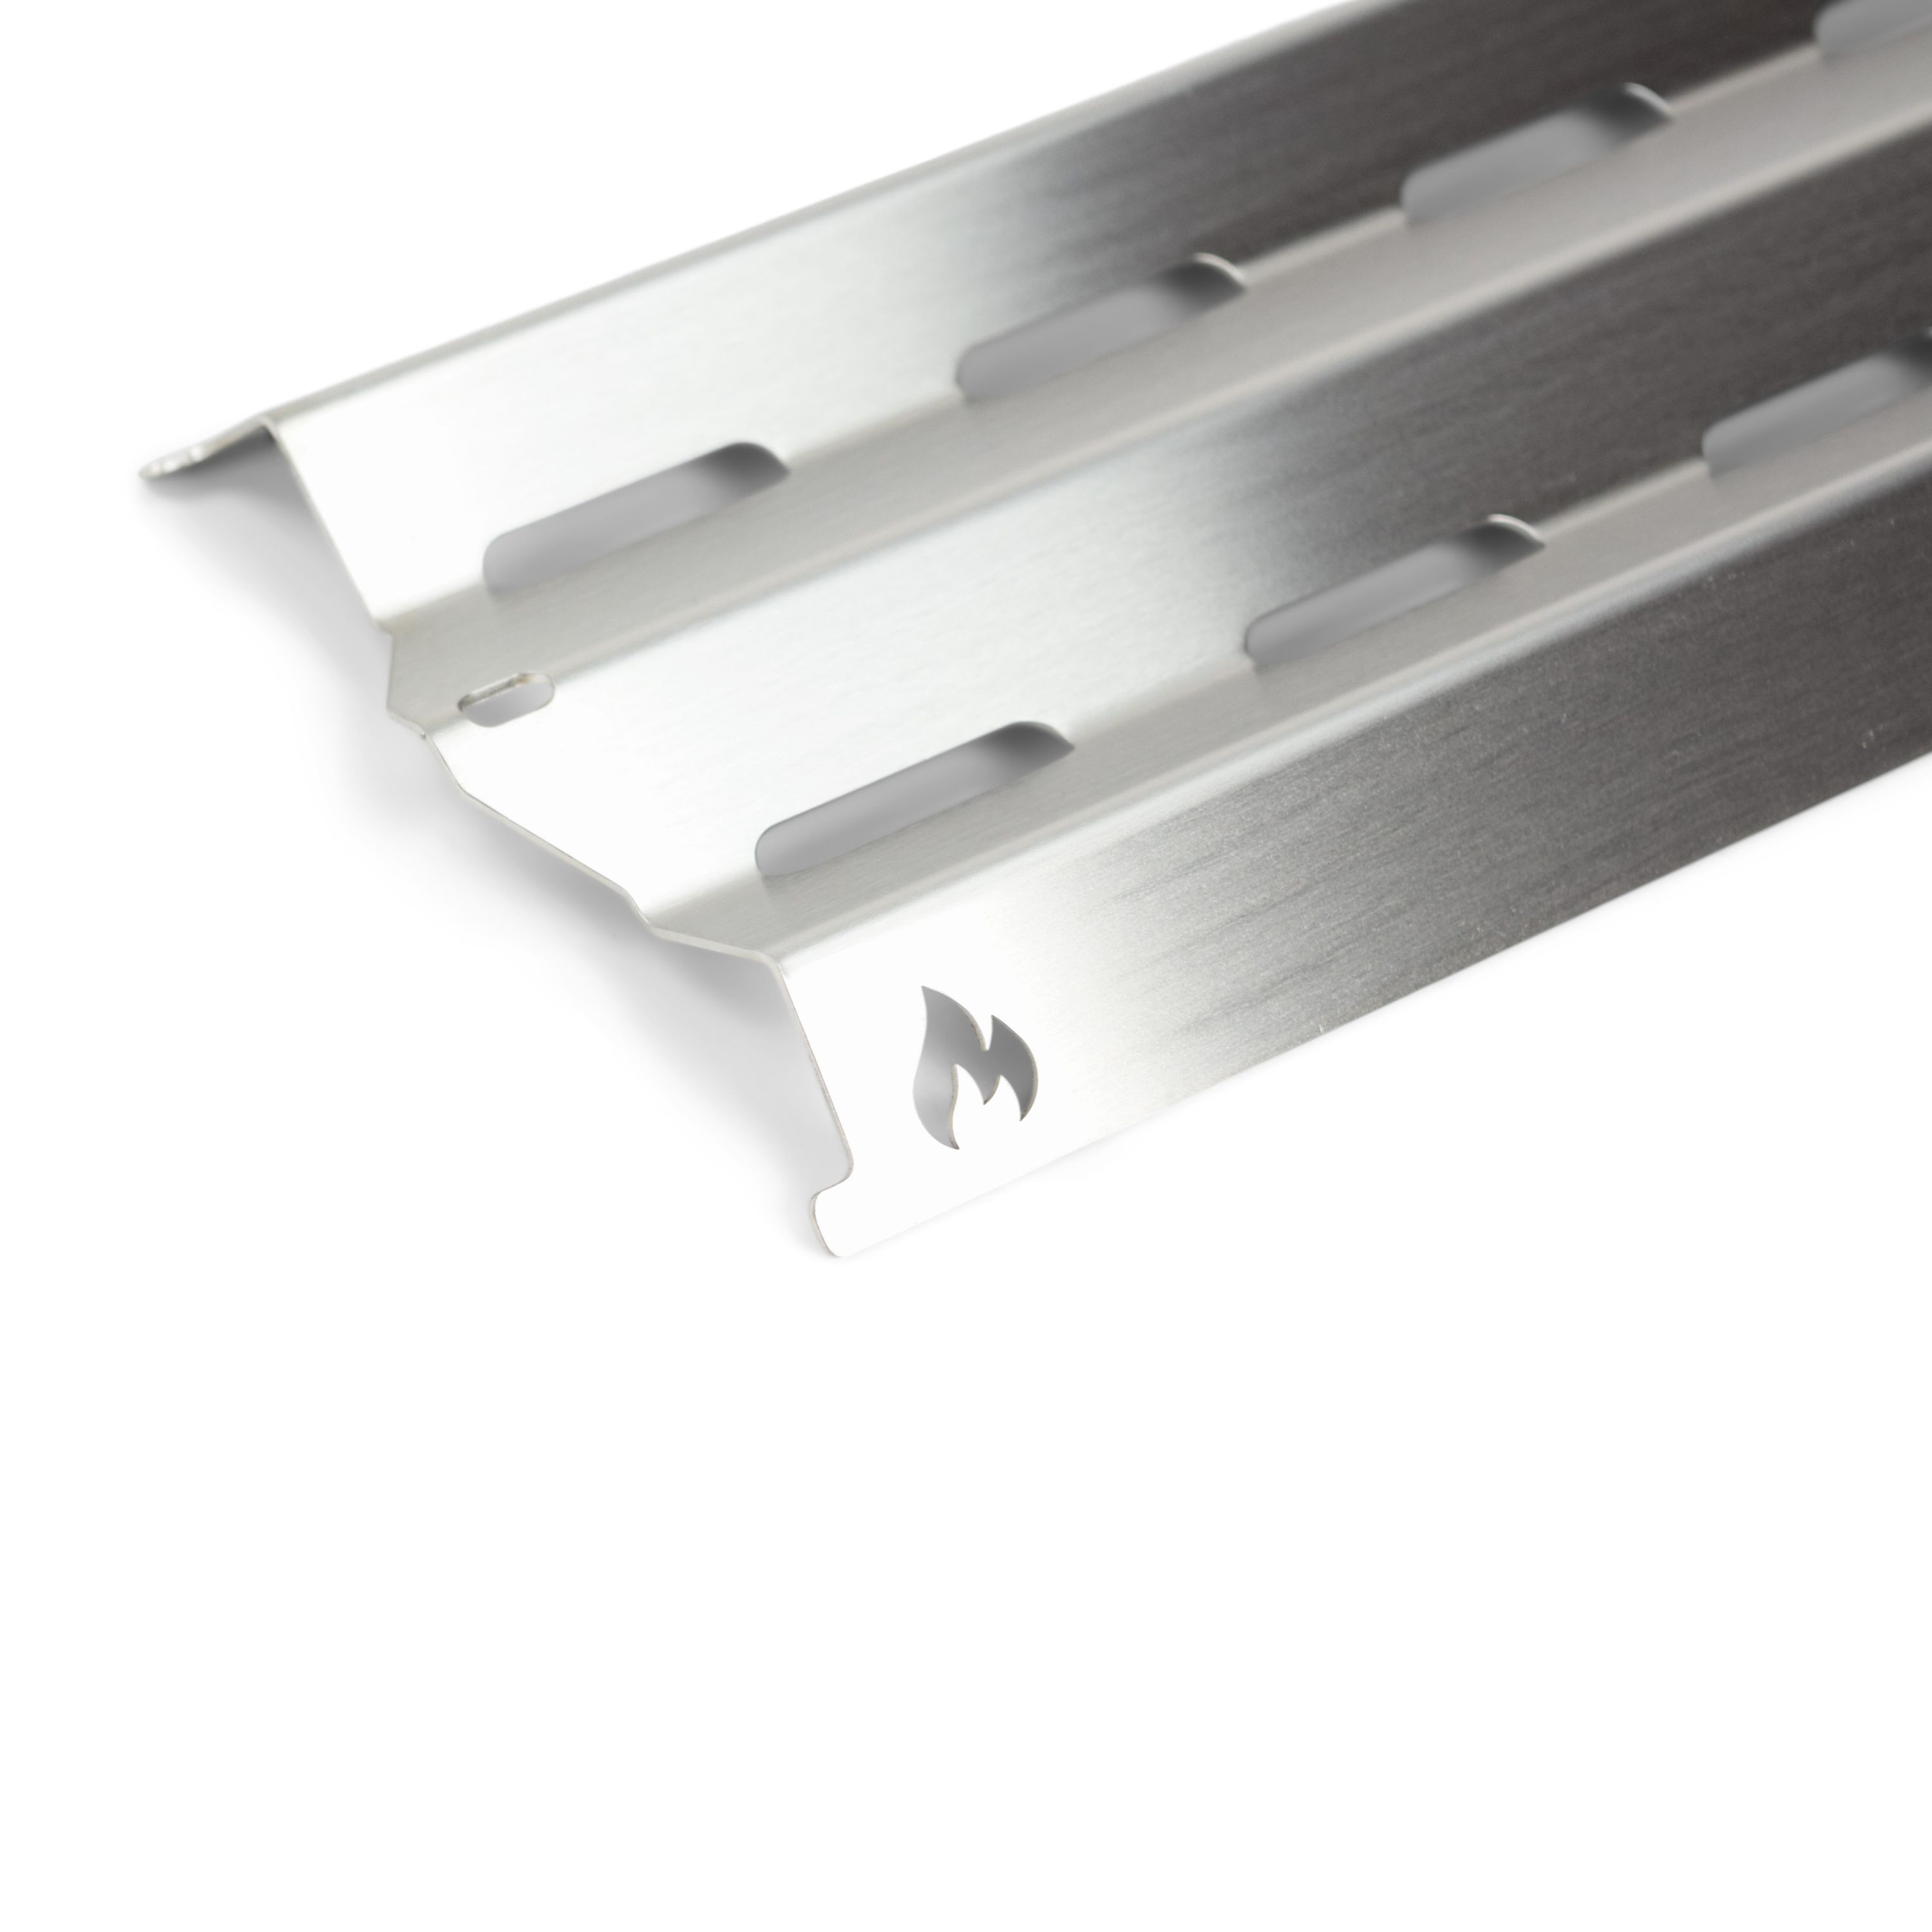 Stainless steel aroma rail for Broil King Monarch Signet Sovereign Royal